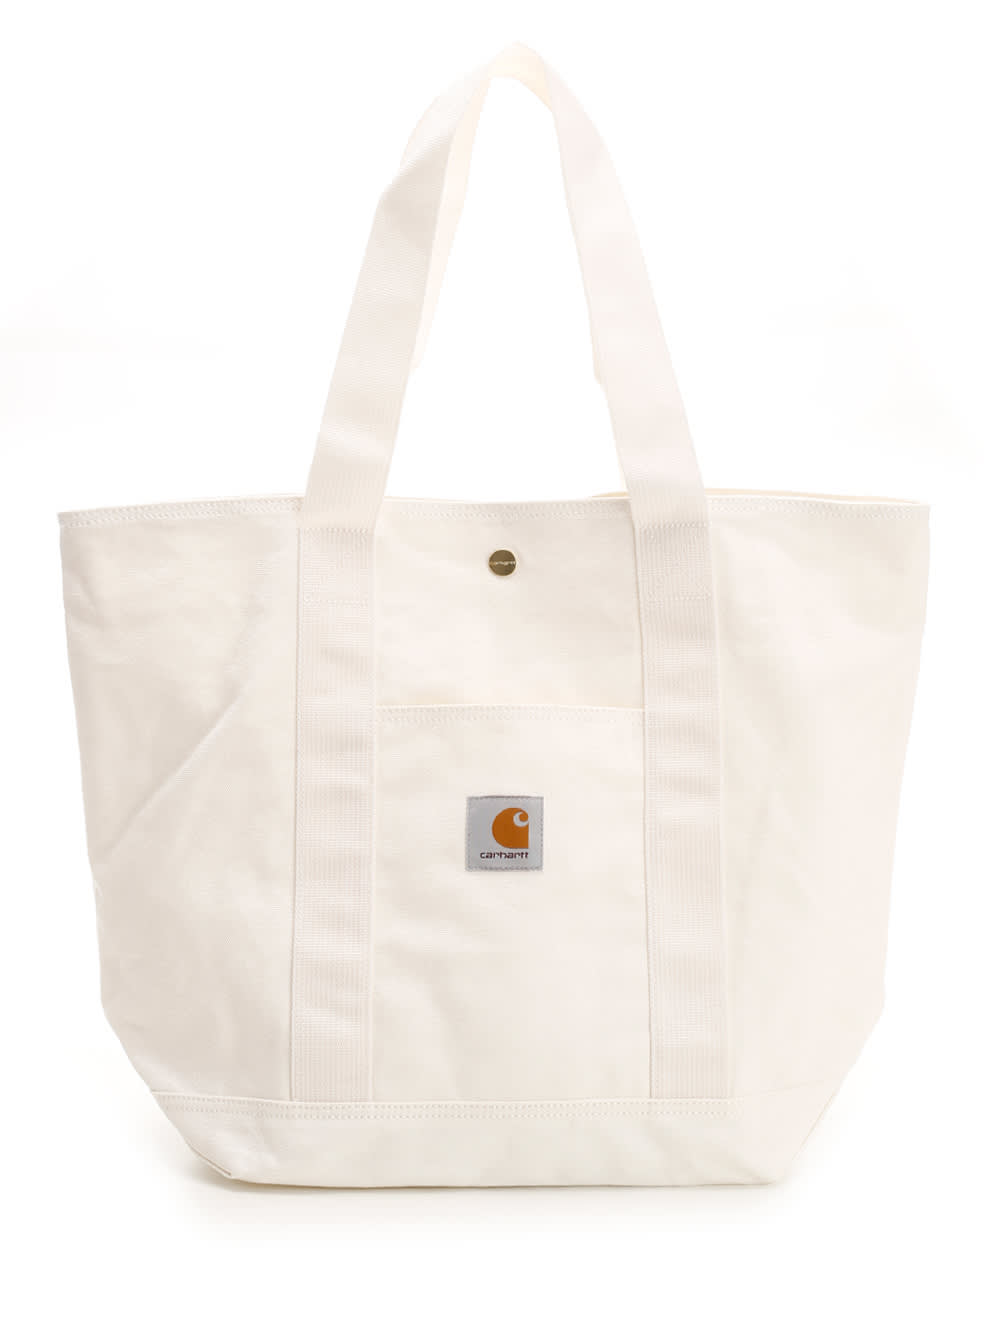 Carhartt Canvas Tote Bag In White